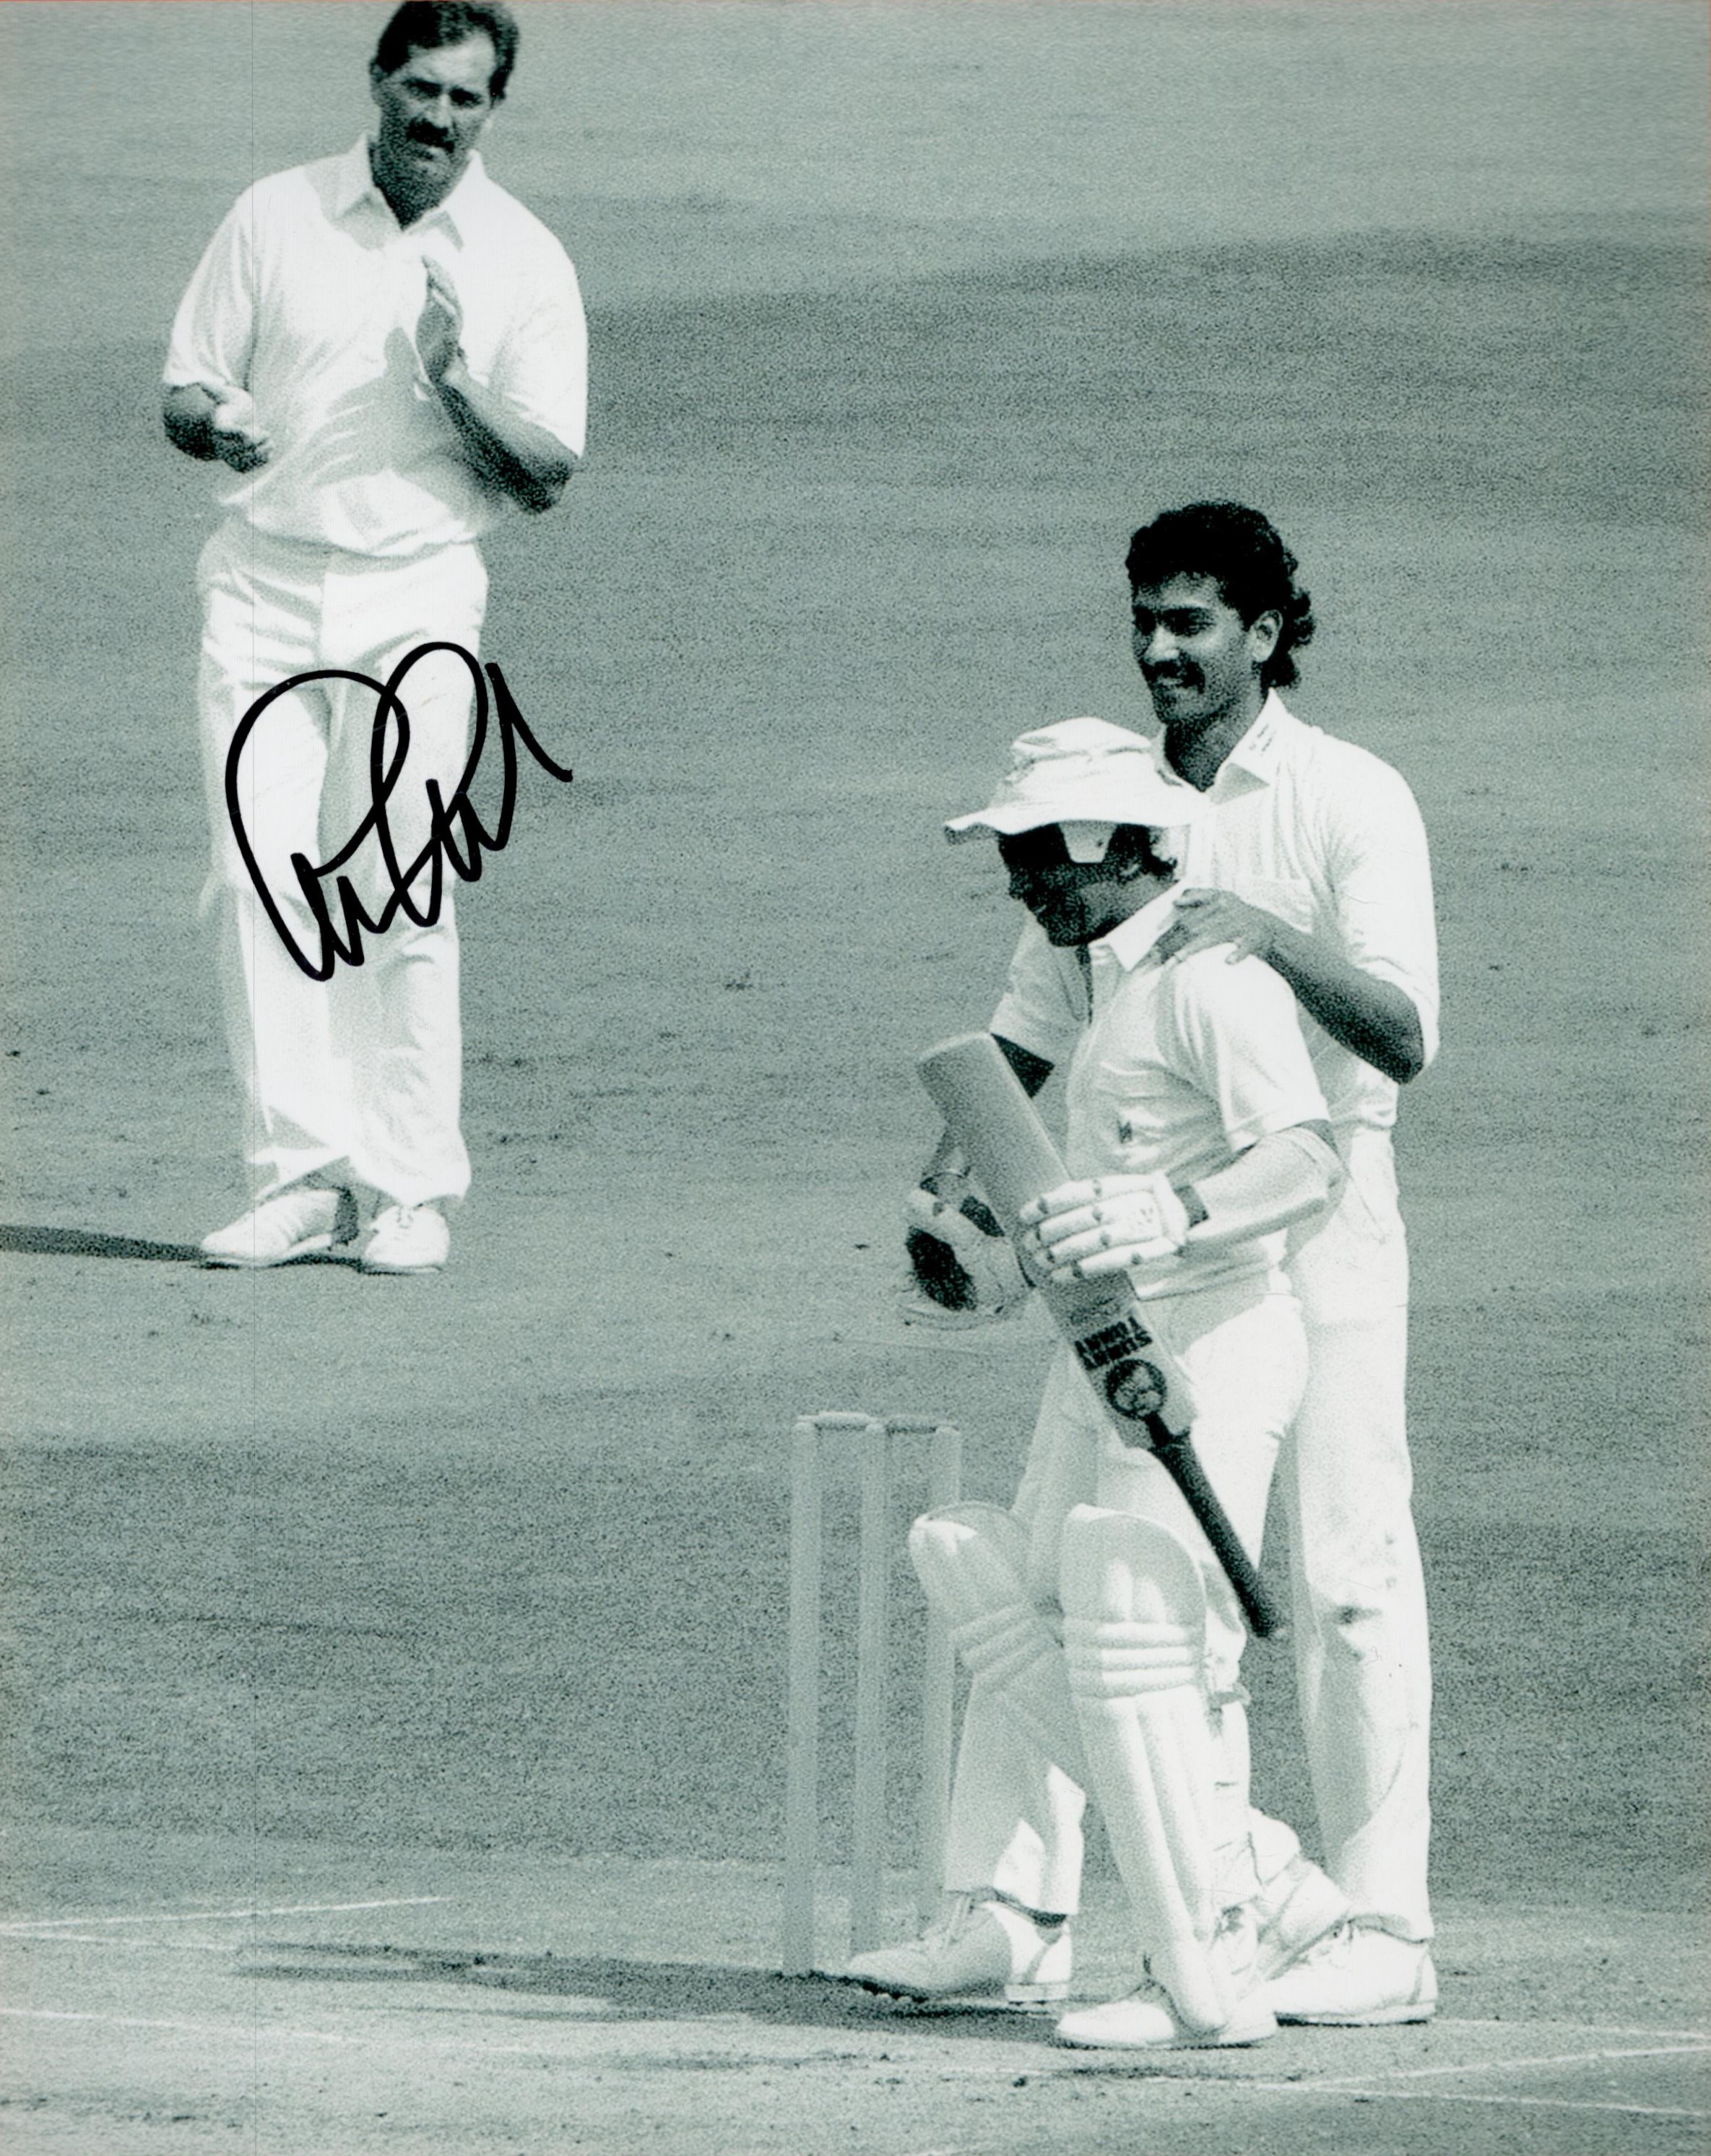 Former England Cricket Star Graeme Gooch Signed 10x8 inch Black and White photo. Good condition. All